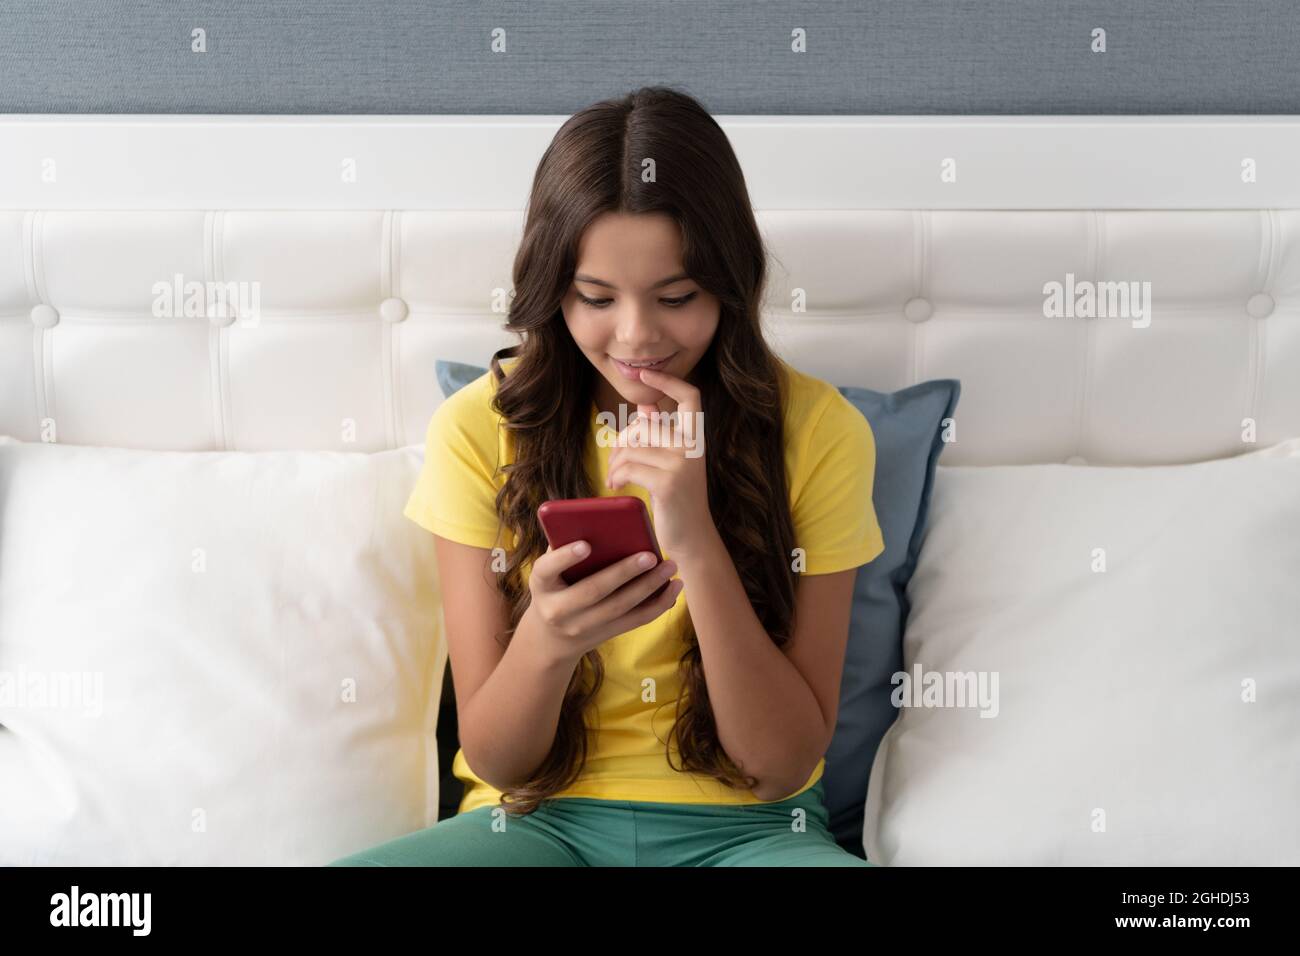 Smartphone generation. Happy child use smartphone sitting on bed. Chatting on smart phone Stock Photo